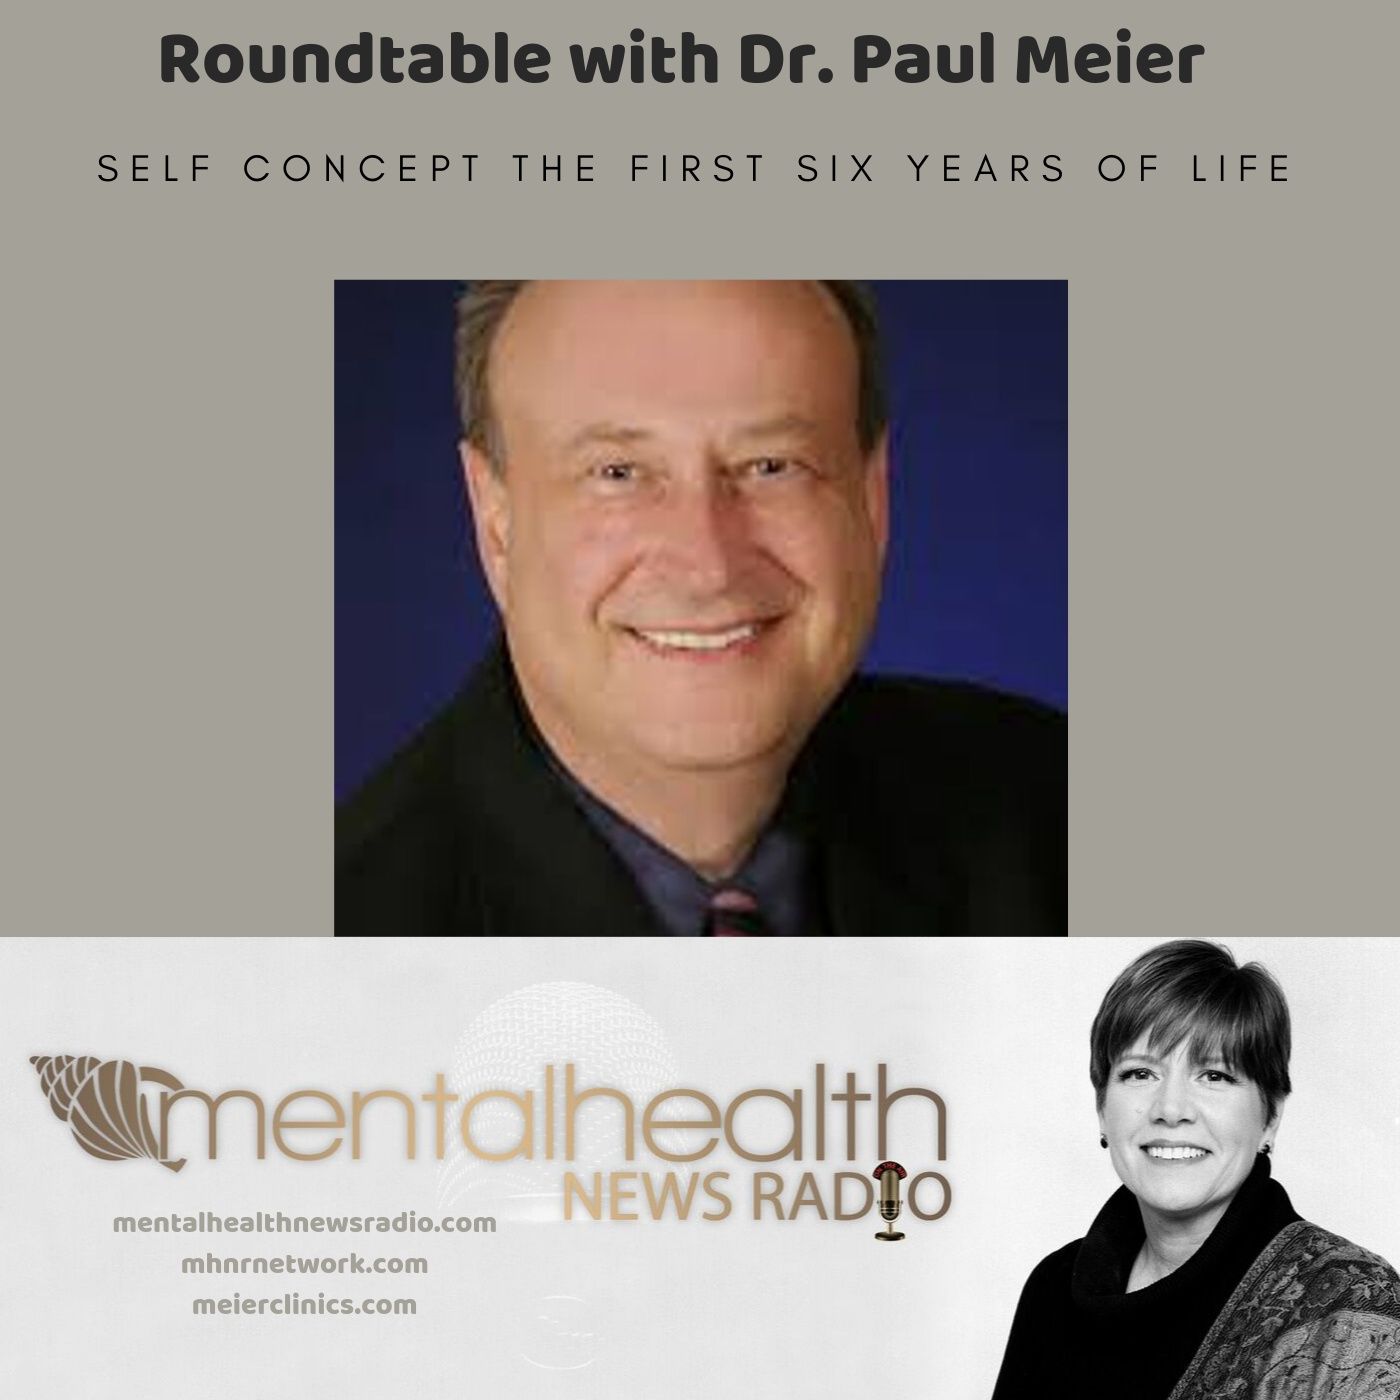 Mental Health News Radio - Roundtable with Dr. Paul Meier: Self-Concept From First Six Years of Life